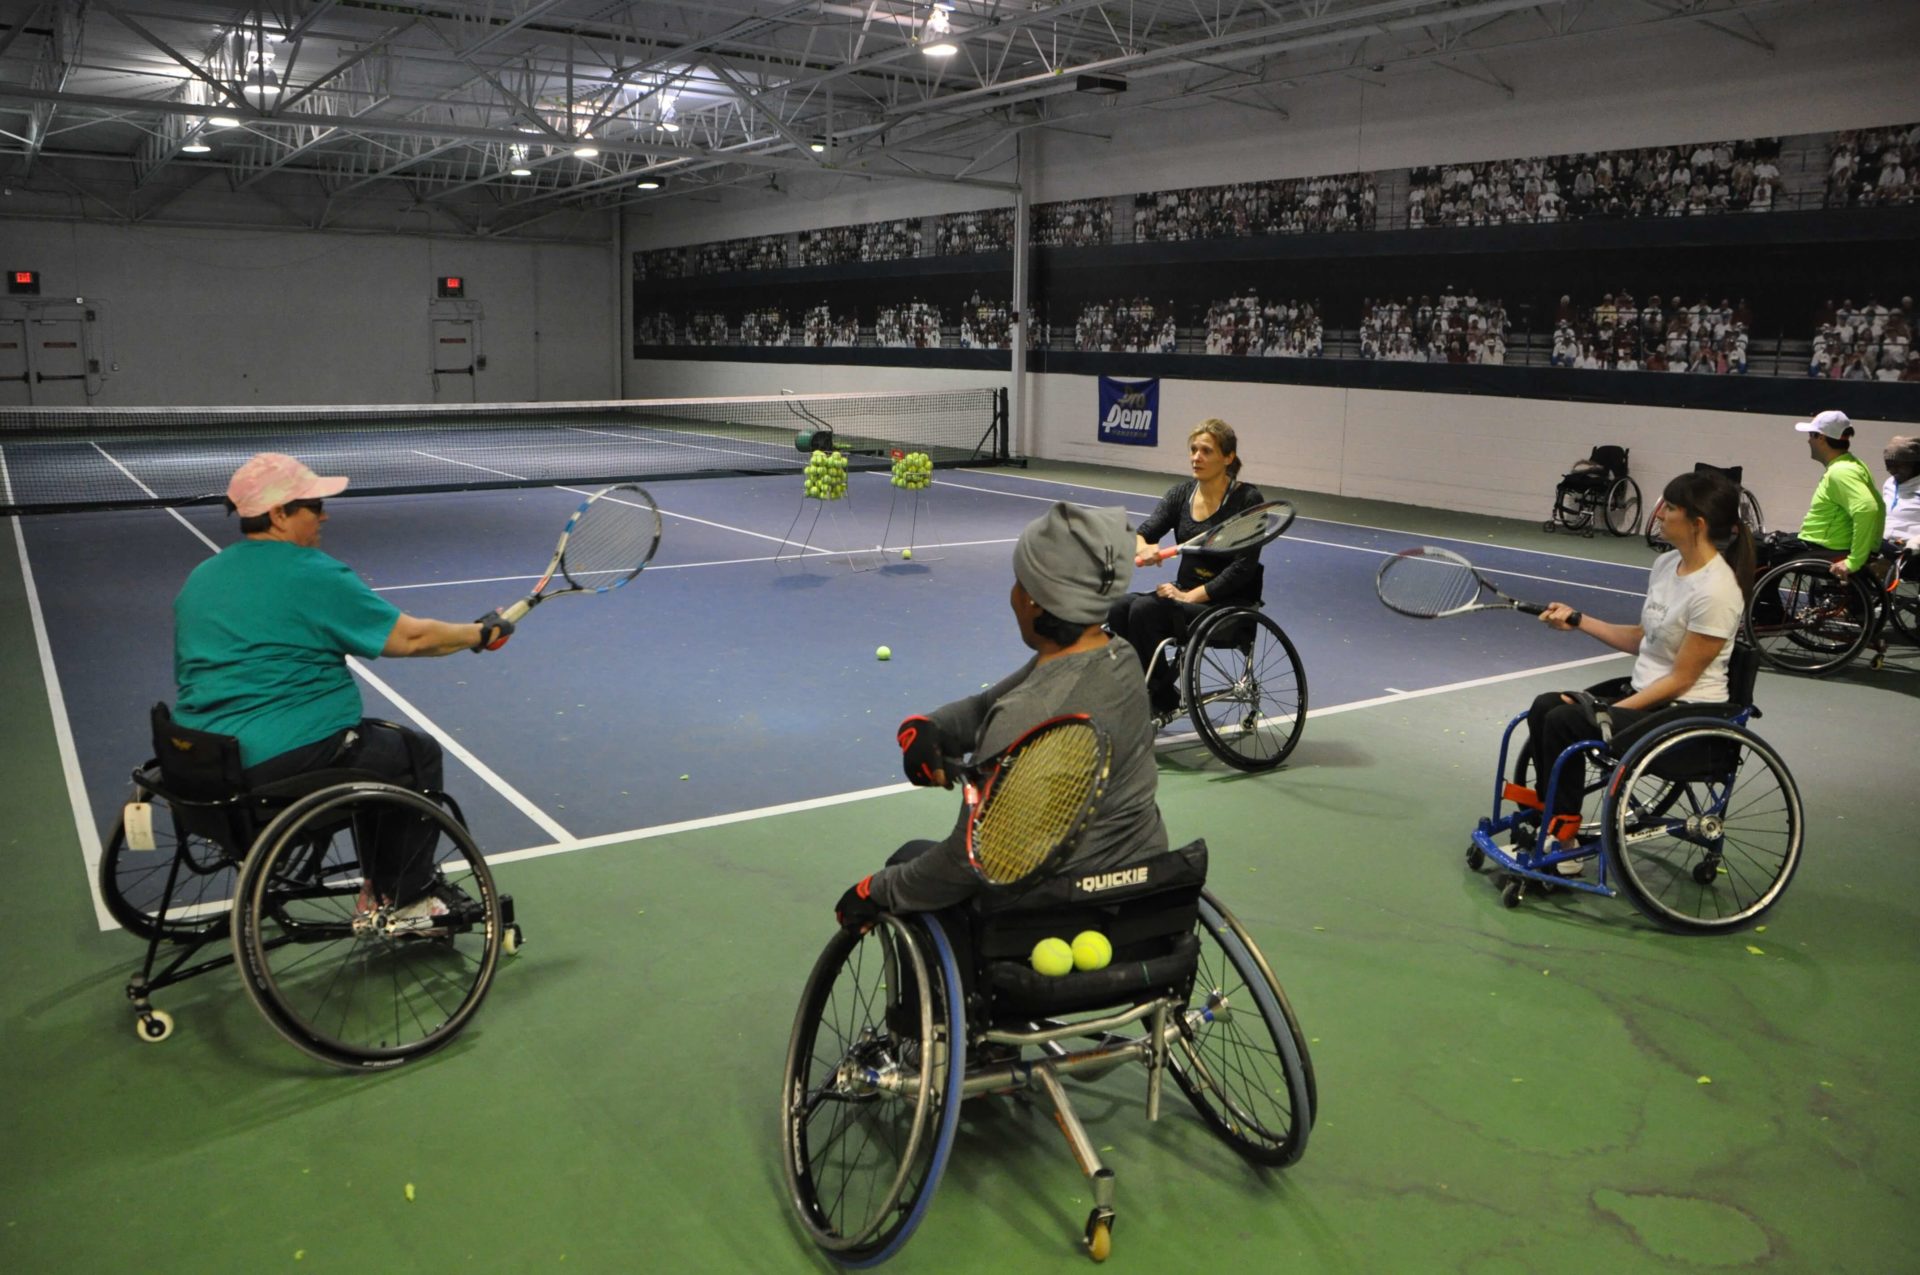 Shepherd patients playing tennis together.